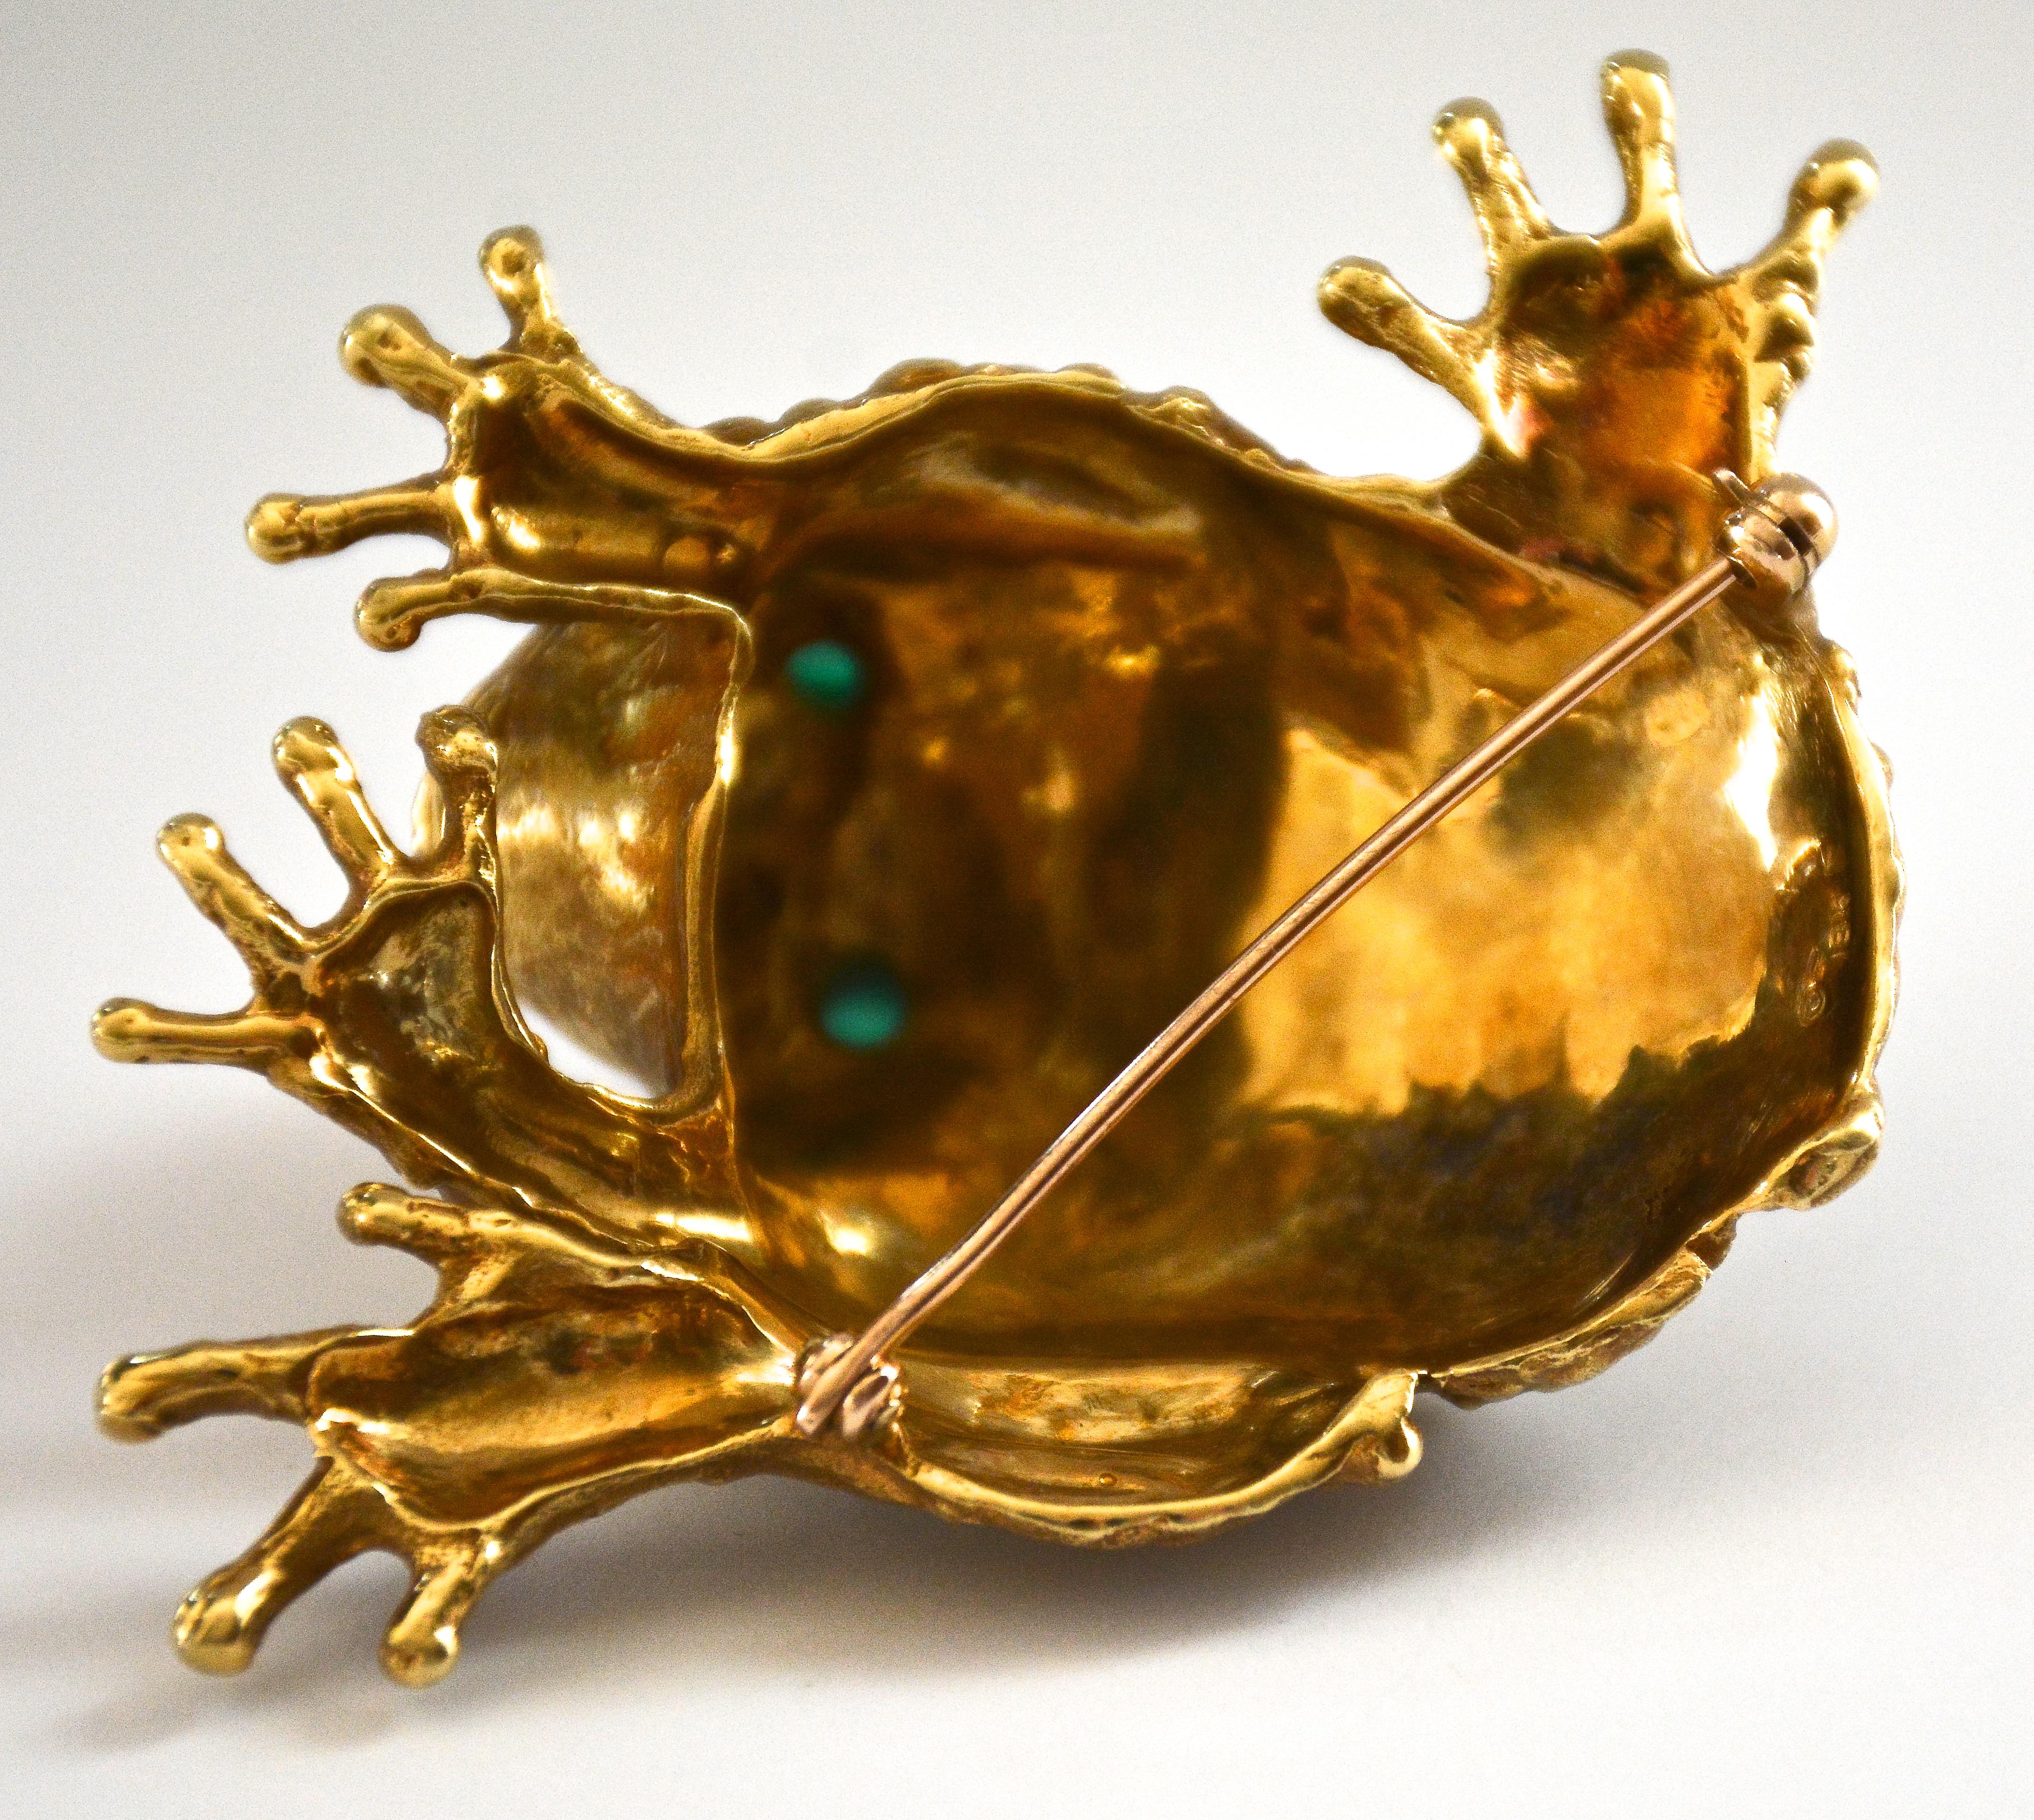 Erwin Pearl 1980s Fine Jewelry 18k. Gold Frog Brooch Set with Chrysoprase Eyes 1